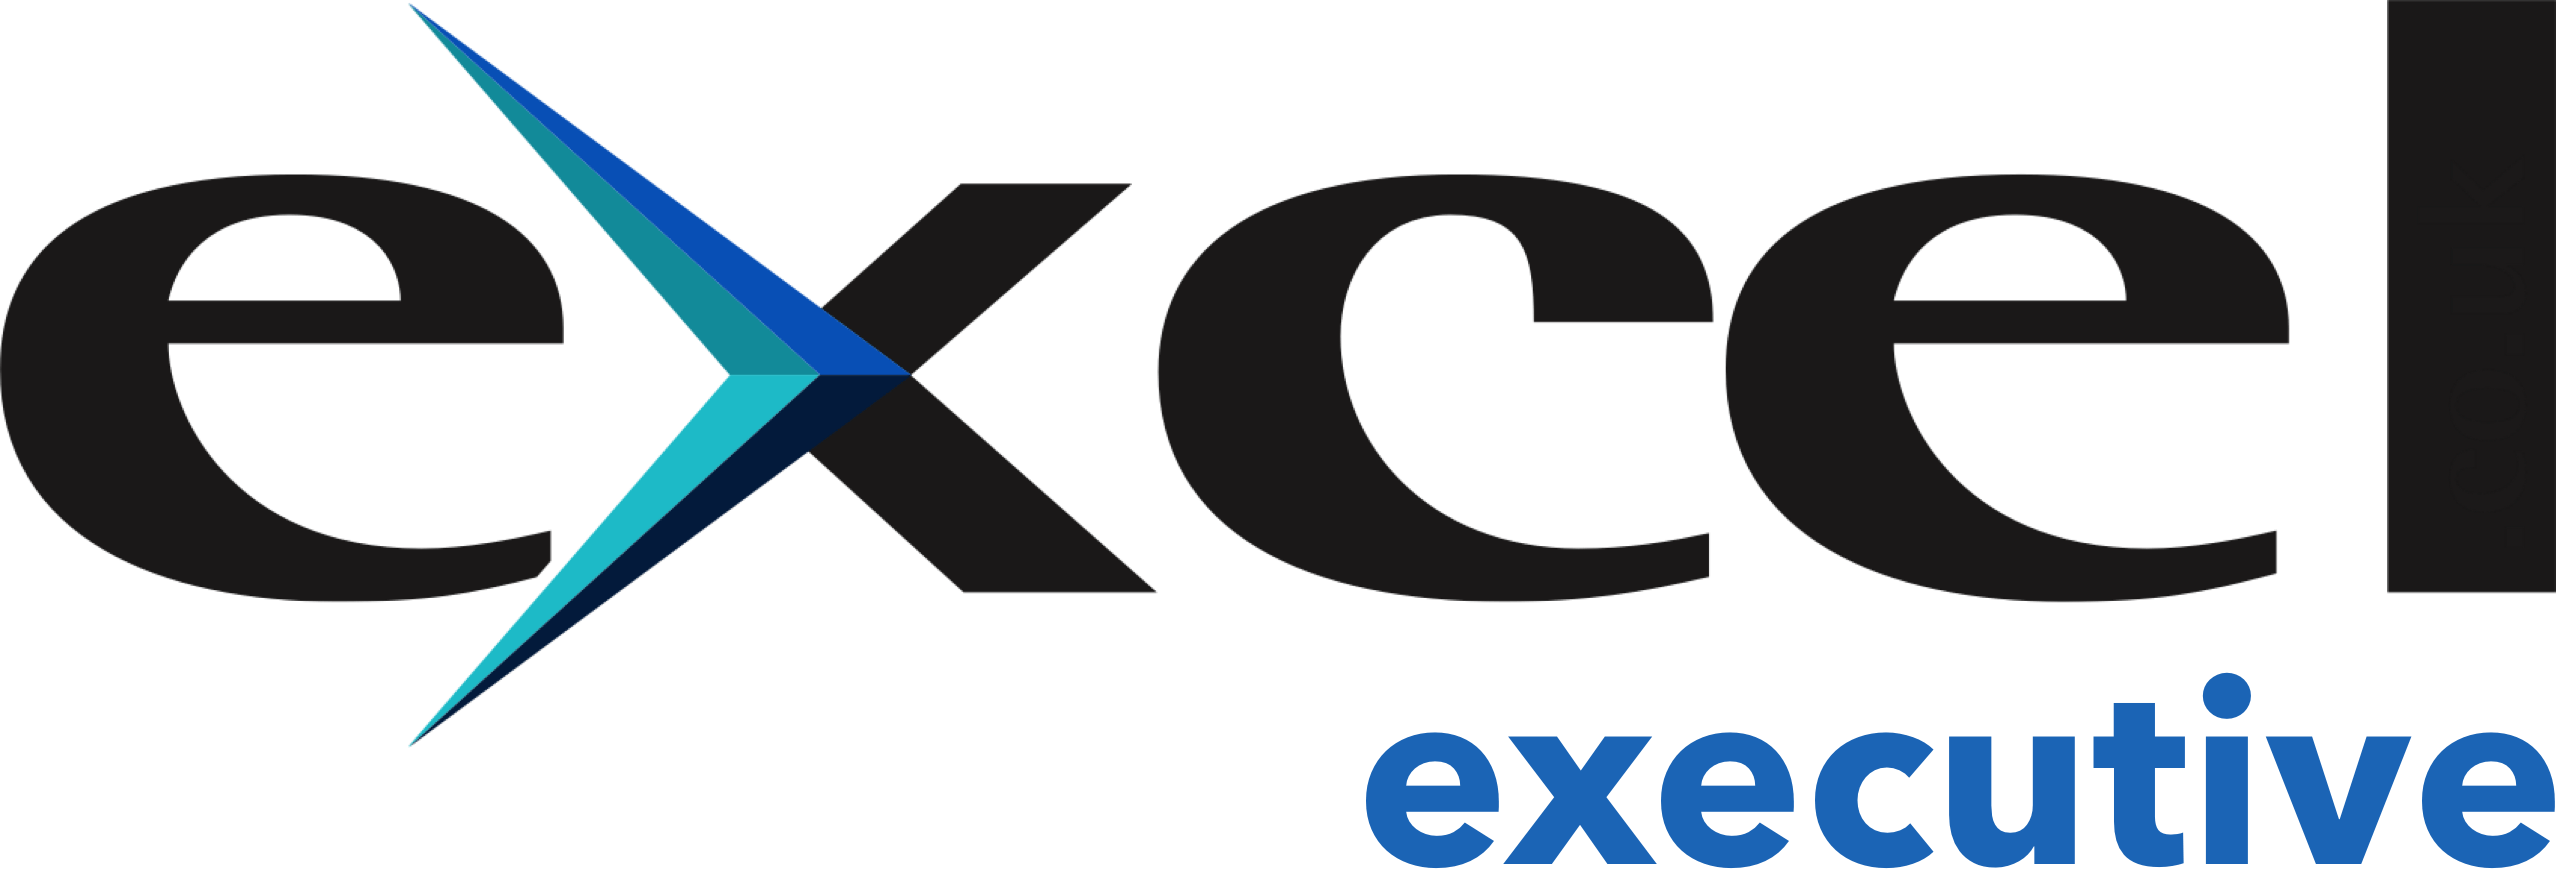 Exel Logo - Best in Class Executive Car Hire in London | Excel Executive